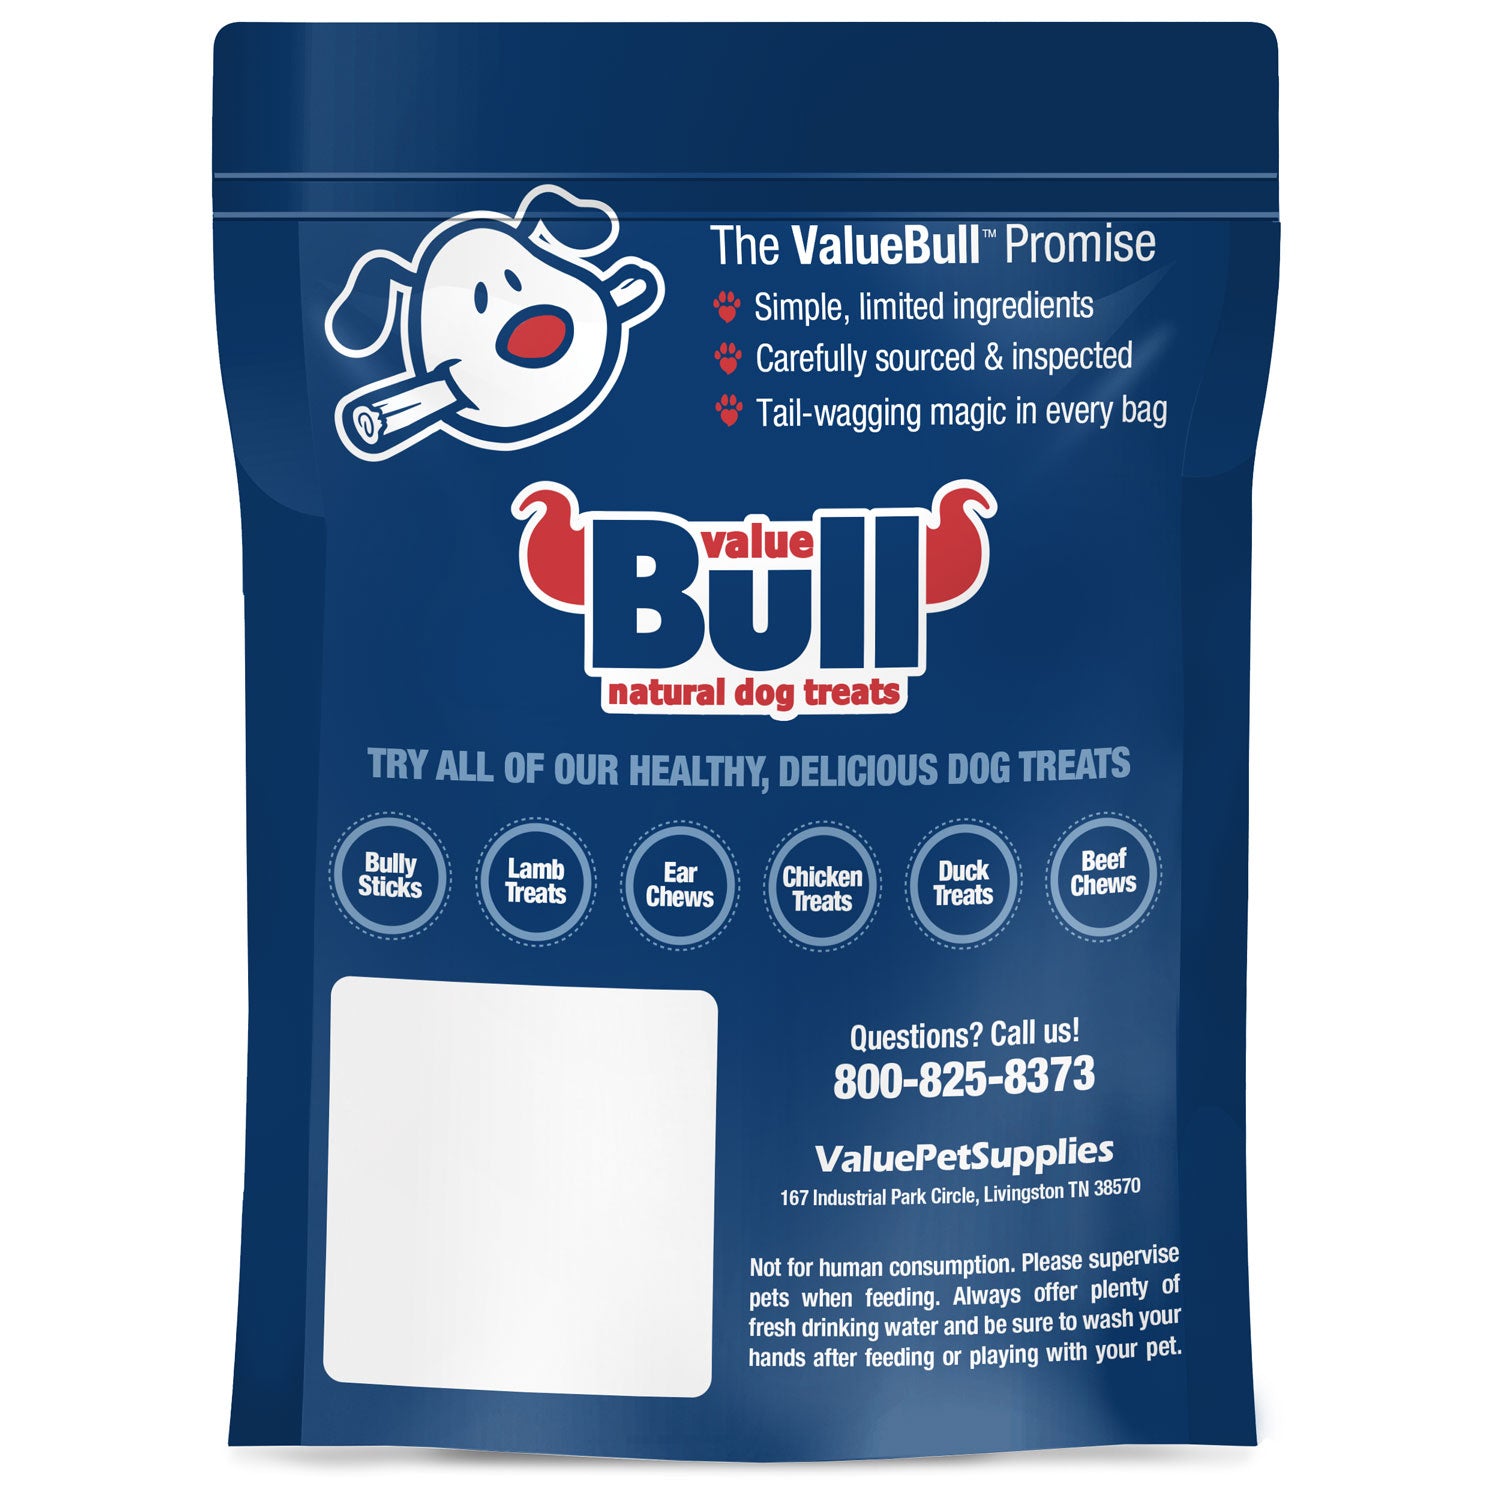 ValueBull Bully Sticks for Small Dogs, Thin 6 Inch, 3 Count (SAMPLE PACK)